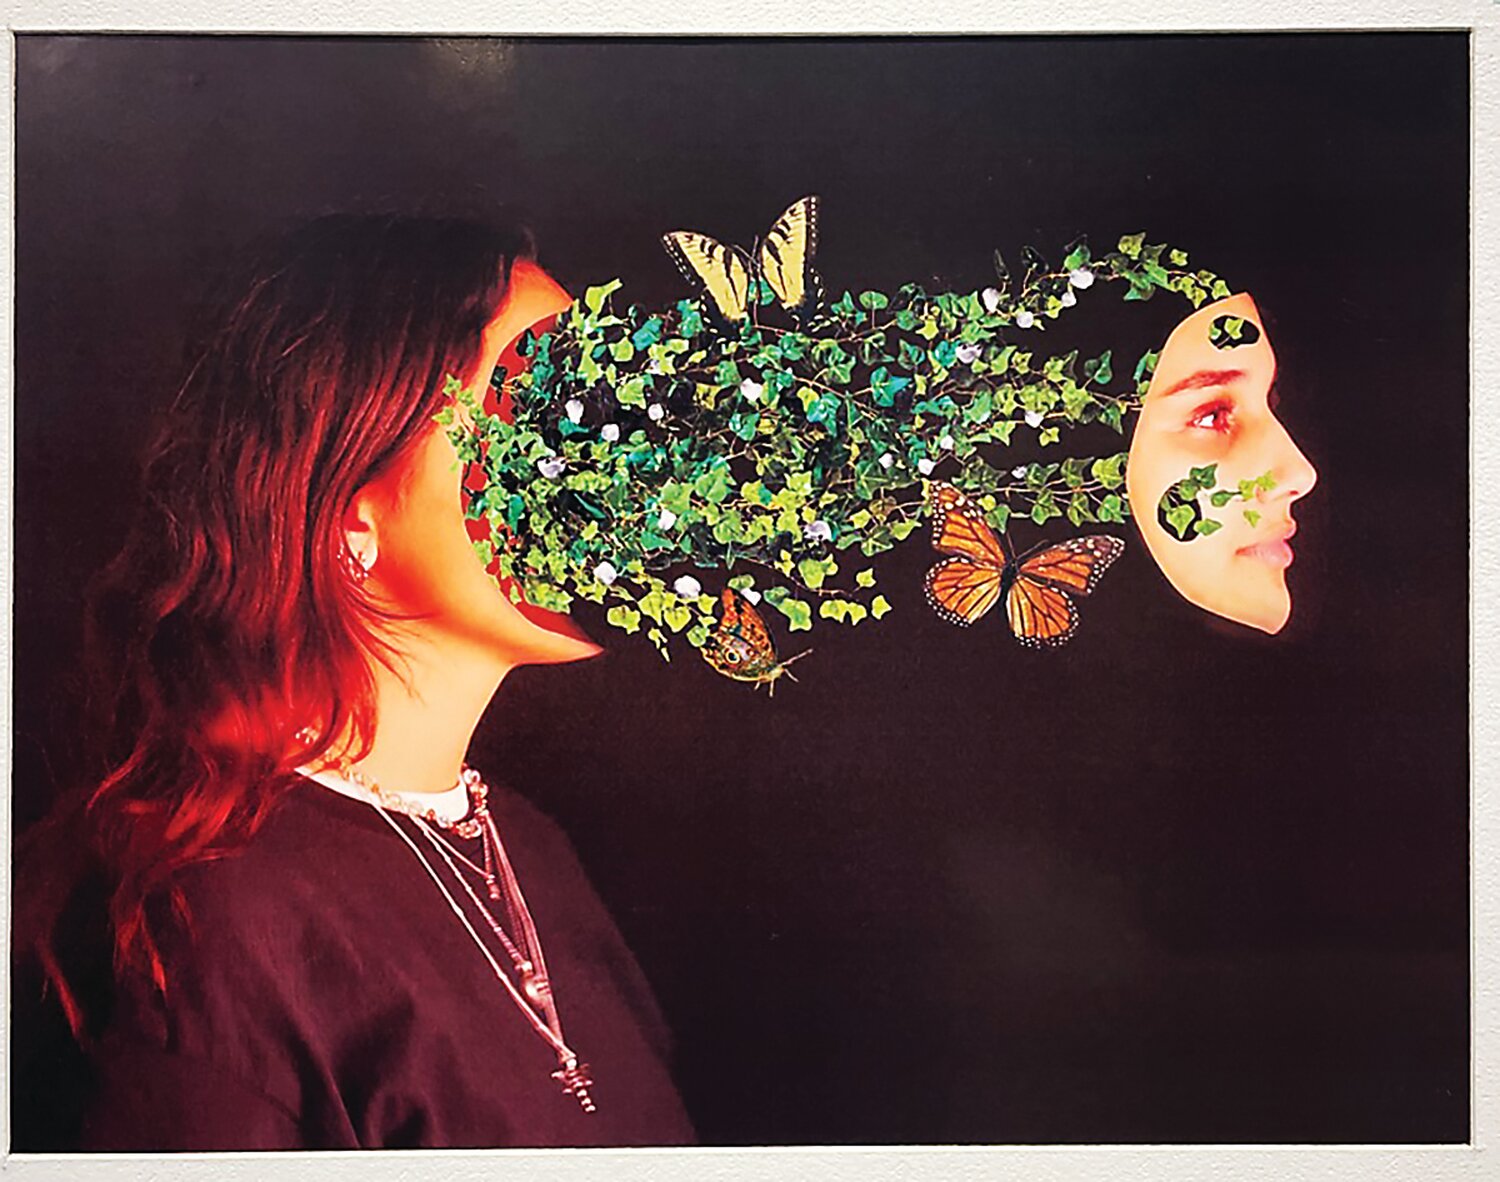 “Self-Portrait,” created by Sara Trudo with Adobe Photoshop, is from the 28th Annual High School Art Exhibition in 2023.